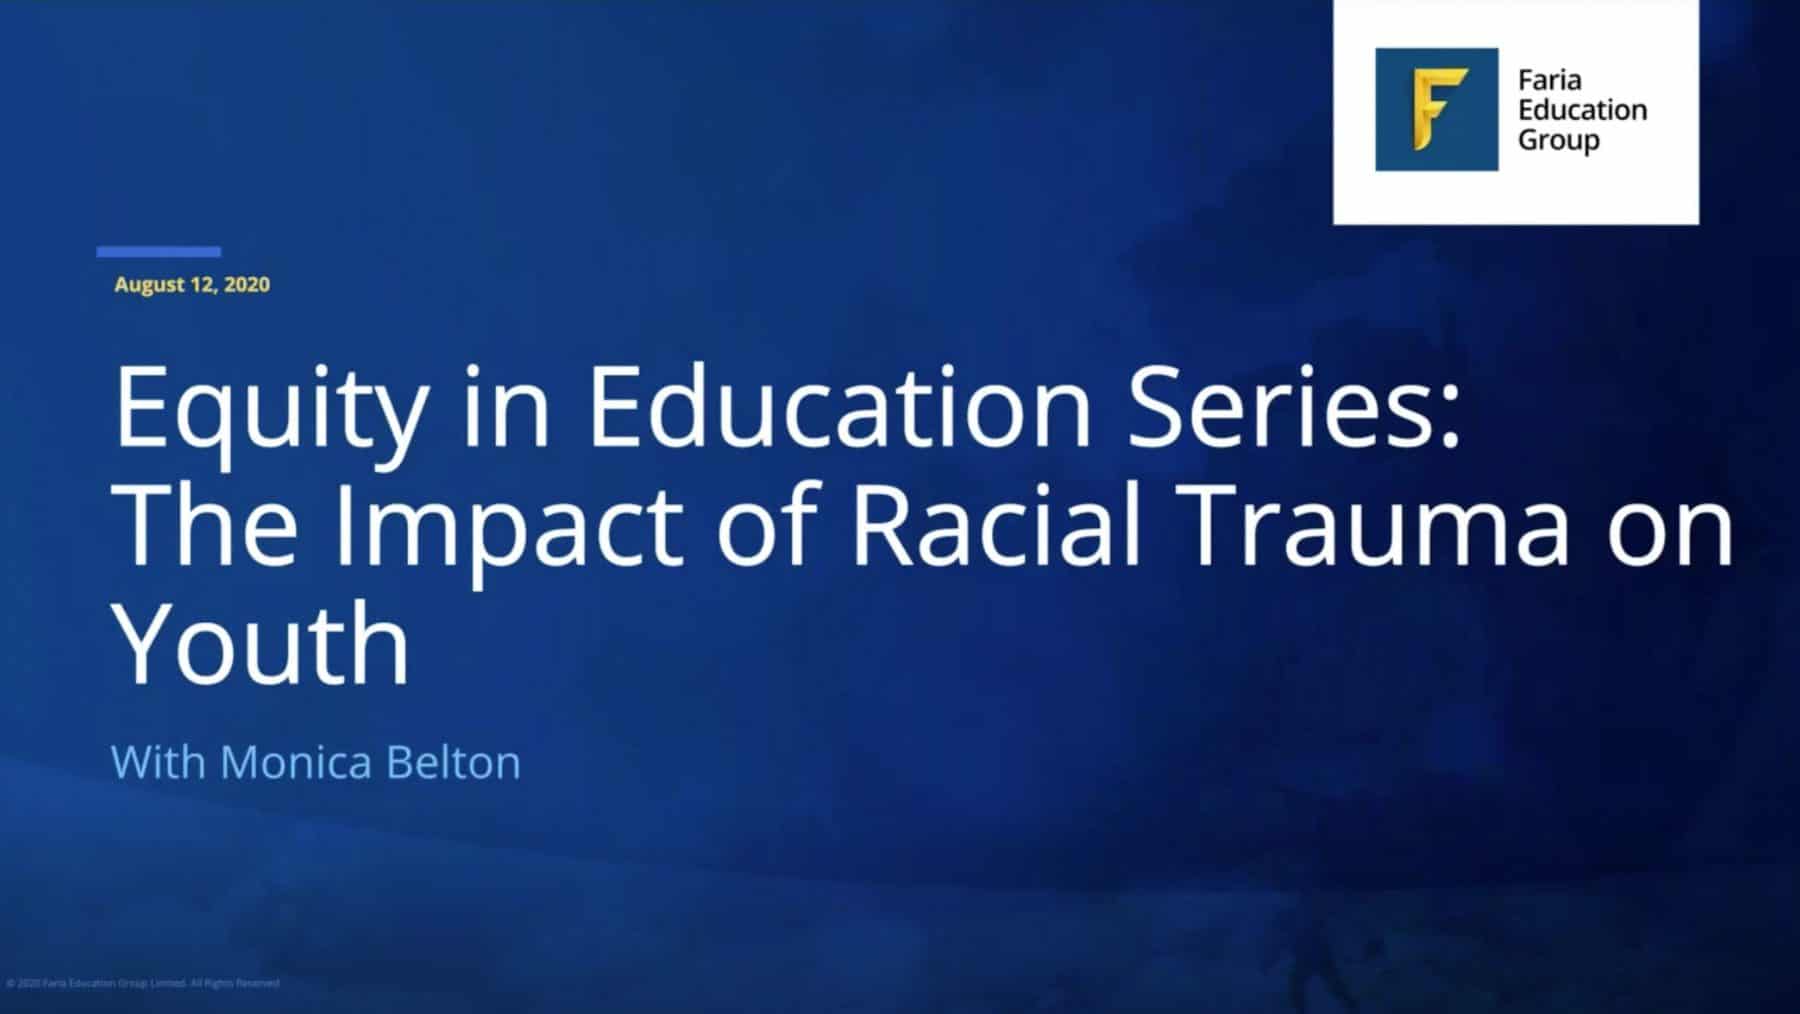 Equity in Education Series: The Impact of Racial Trauma on Youth